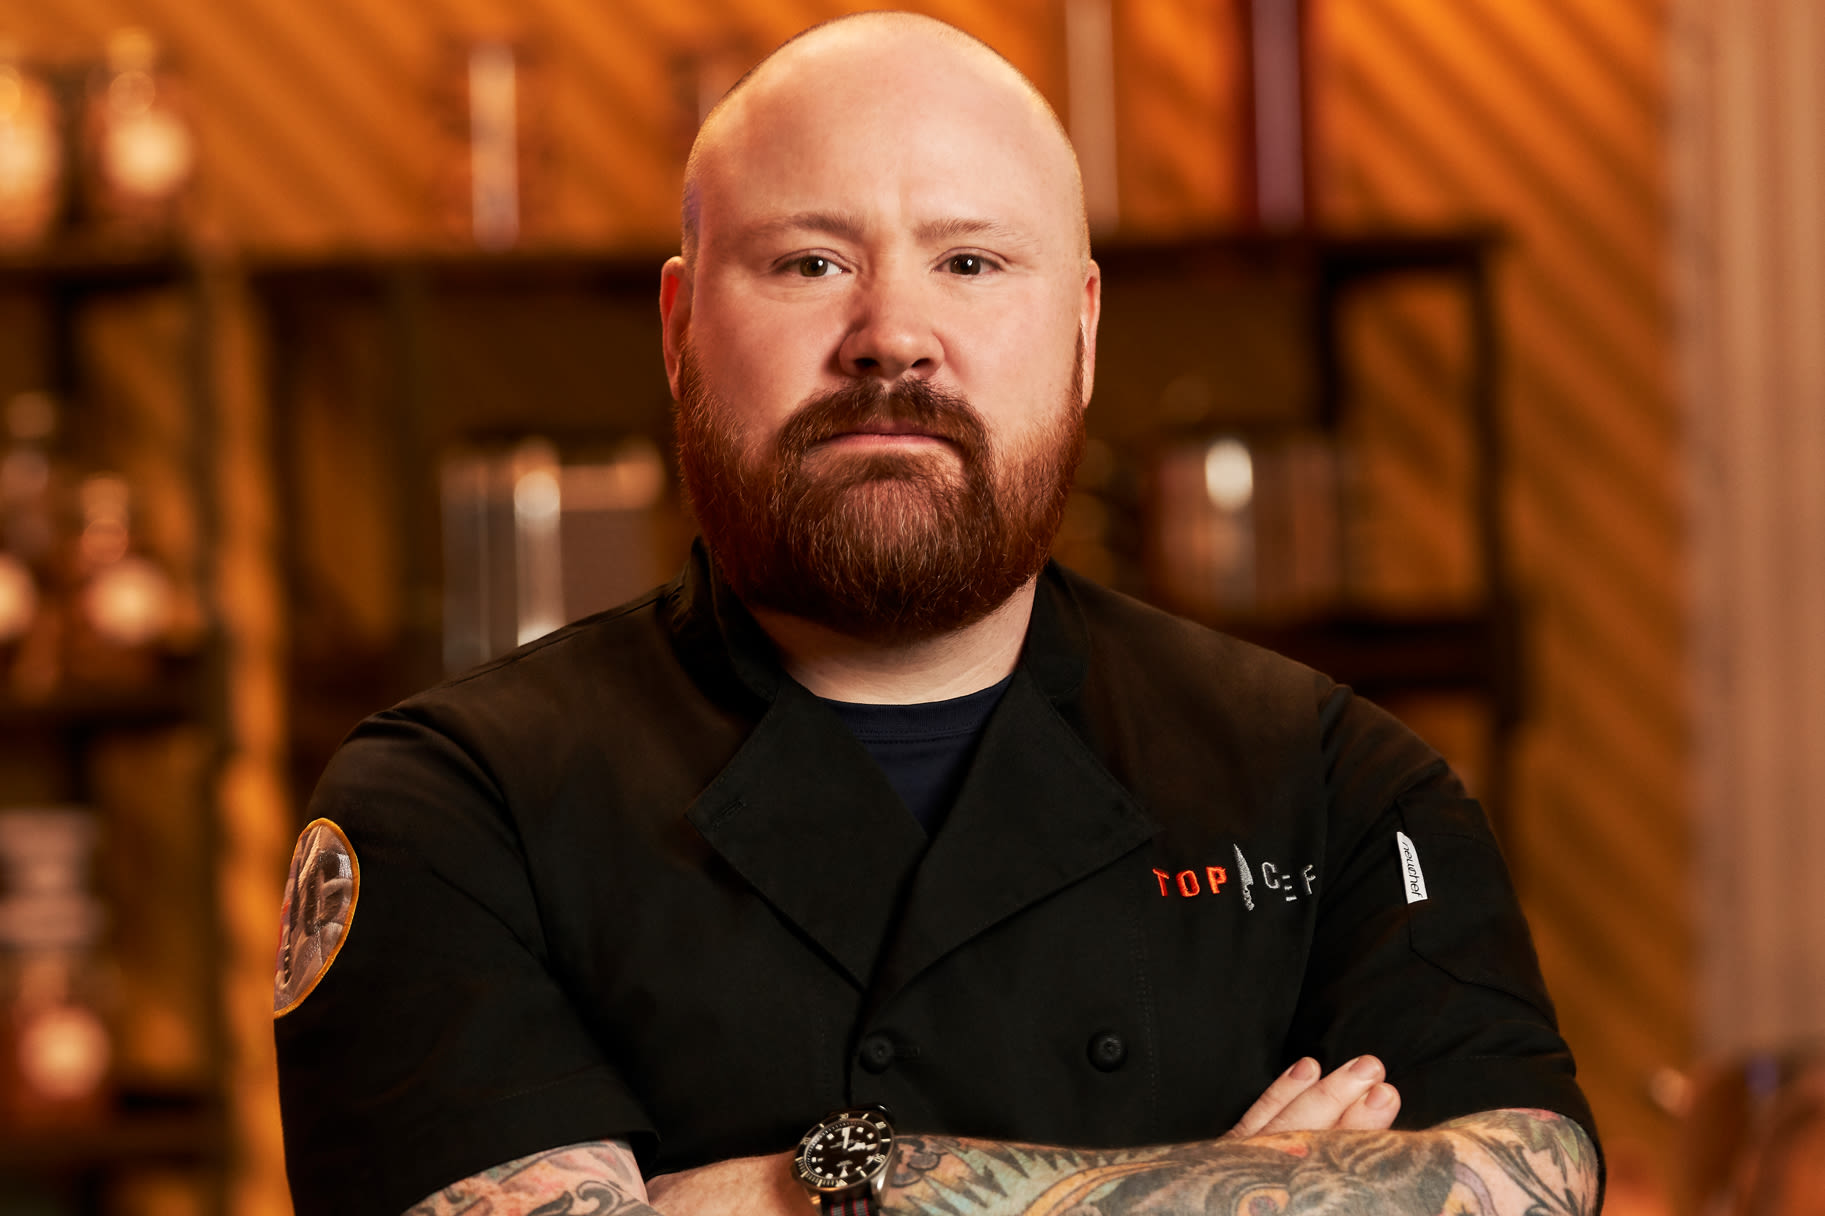 Top Chef Alum Kevin Gillespie Details Living an "Authentic Way" After Emotional Health Journey | Bravo TV Official Site